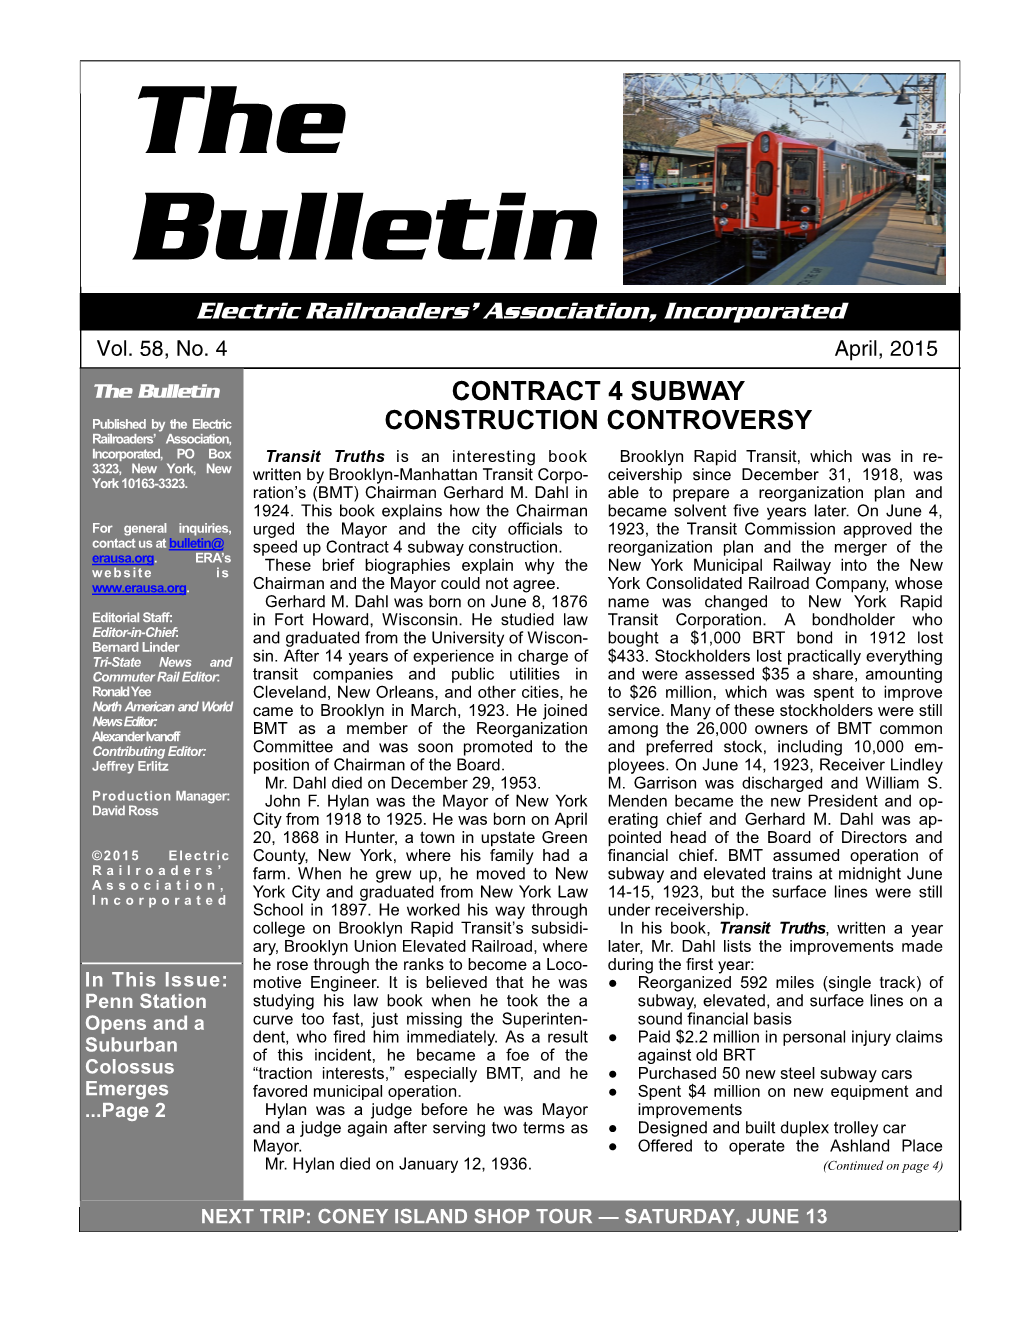 The Bulletin CONTRACT 4 SUBWAY